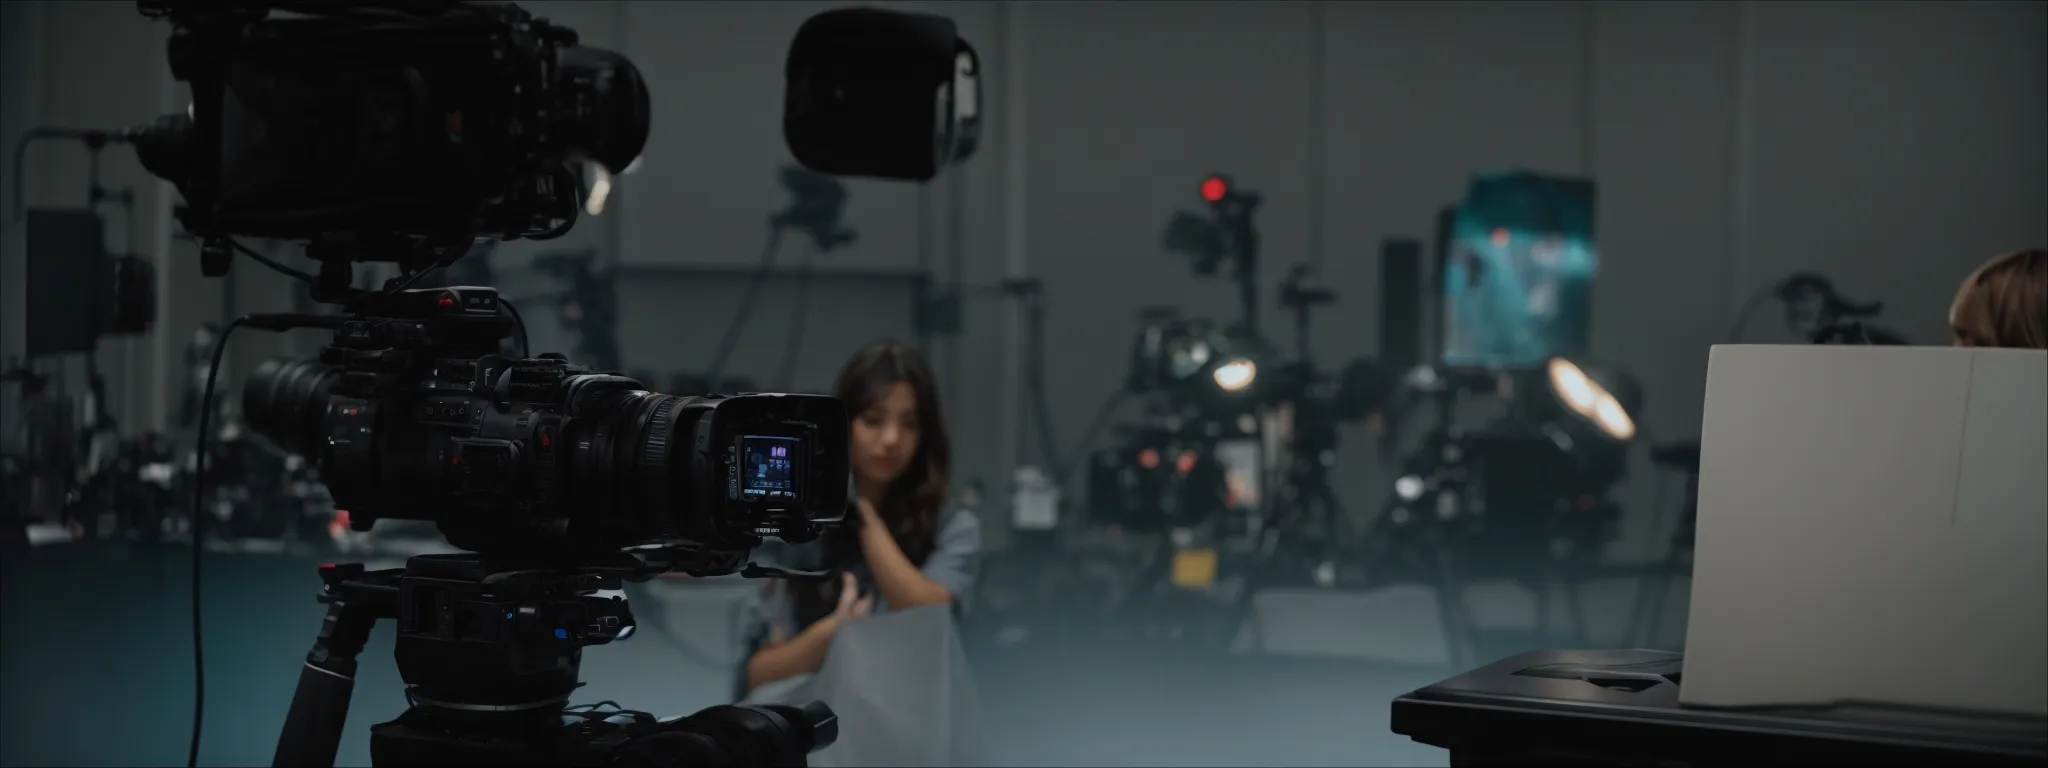 a videographer captures a product demonstration in a well-lit studio.